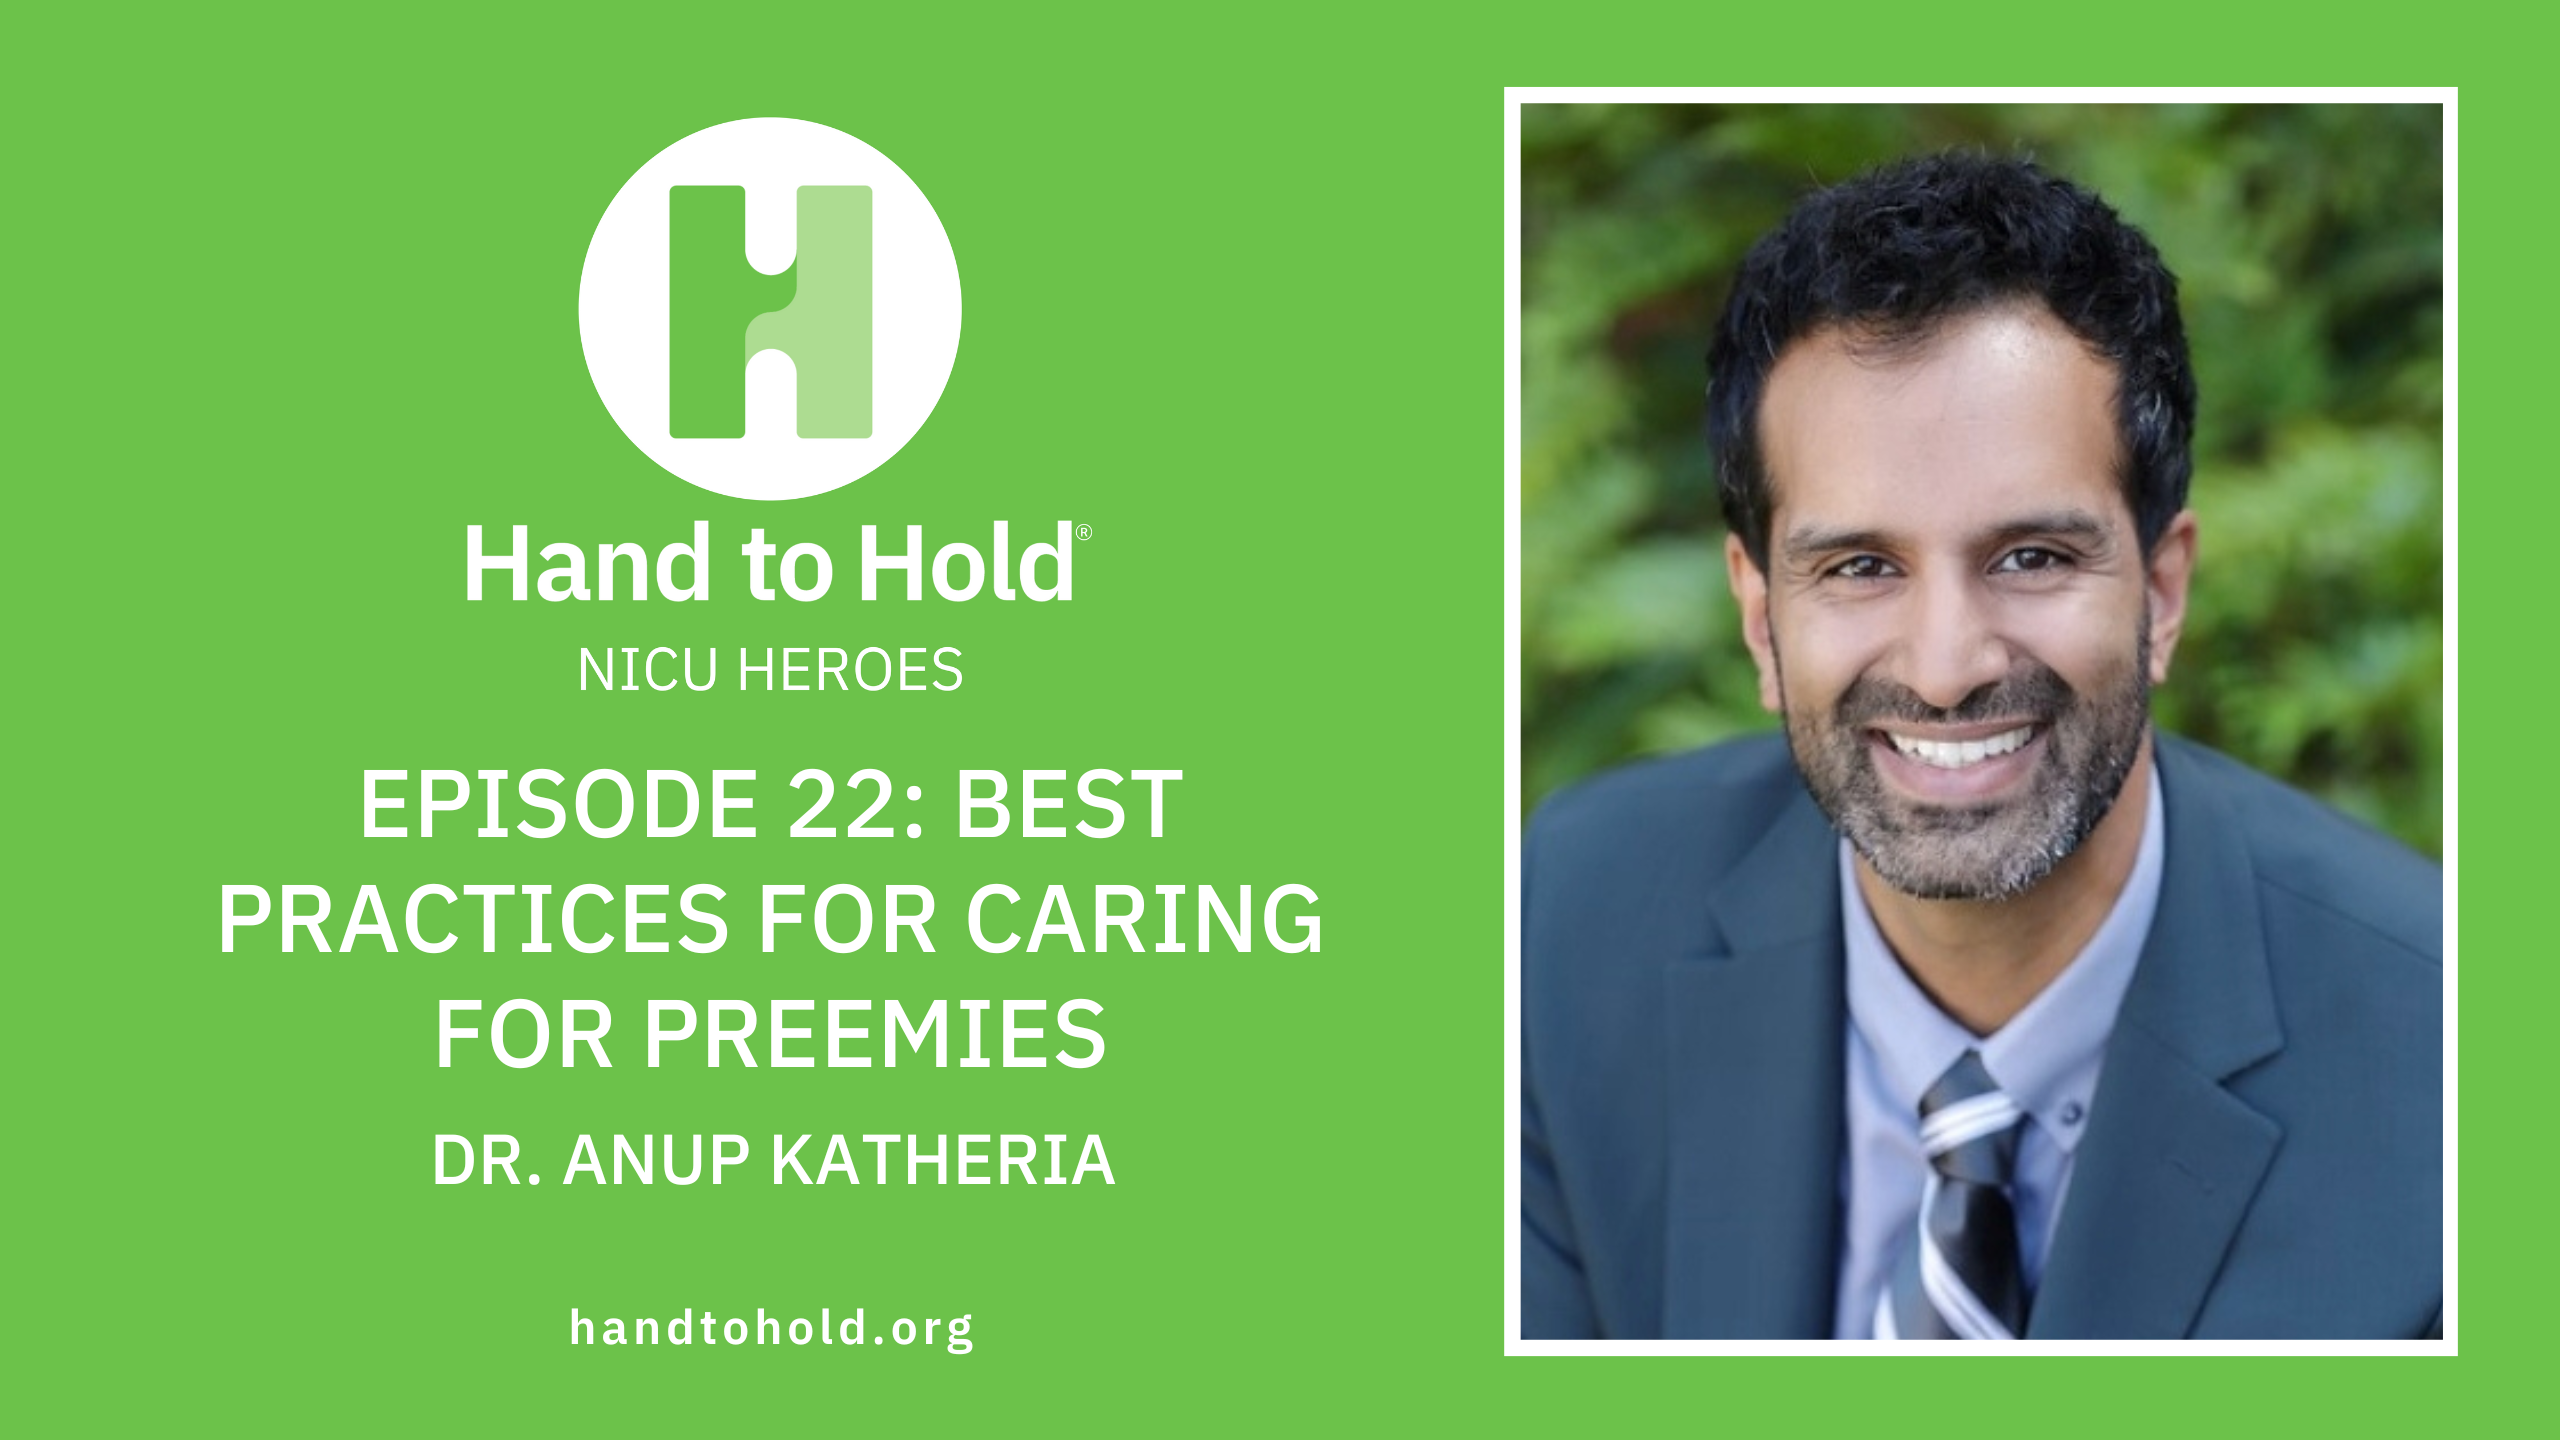 NICU Heroes podcast Anup Katheria, hand to hold